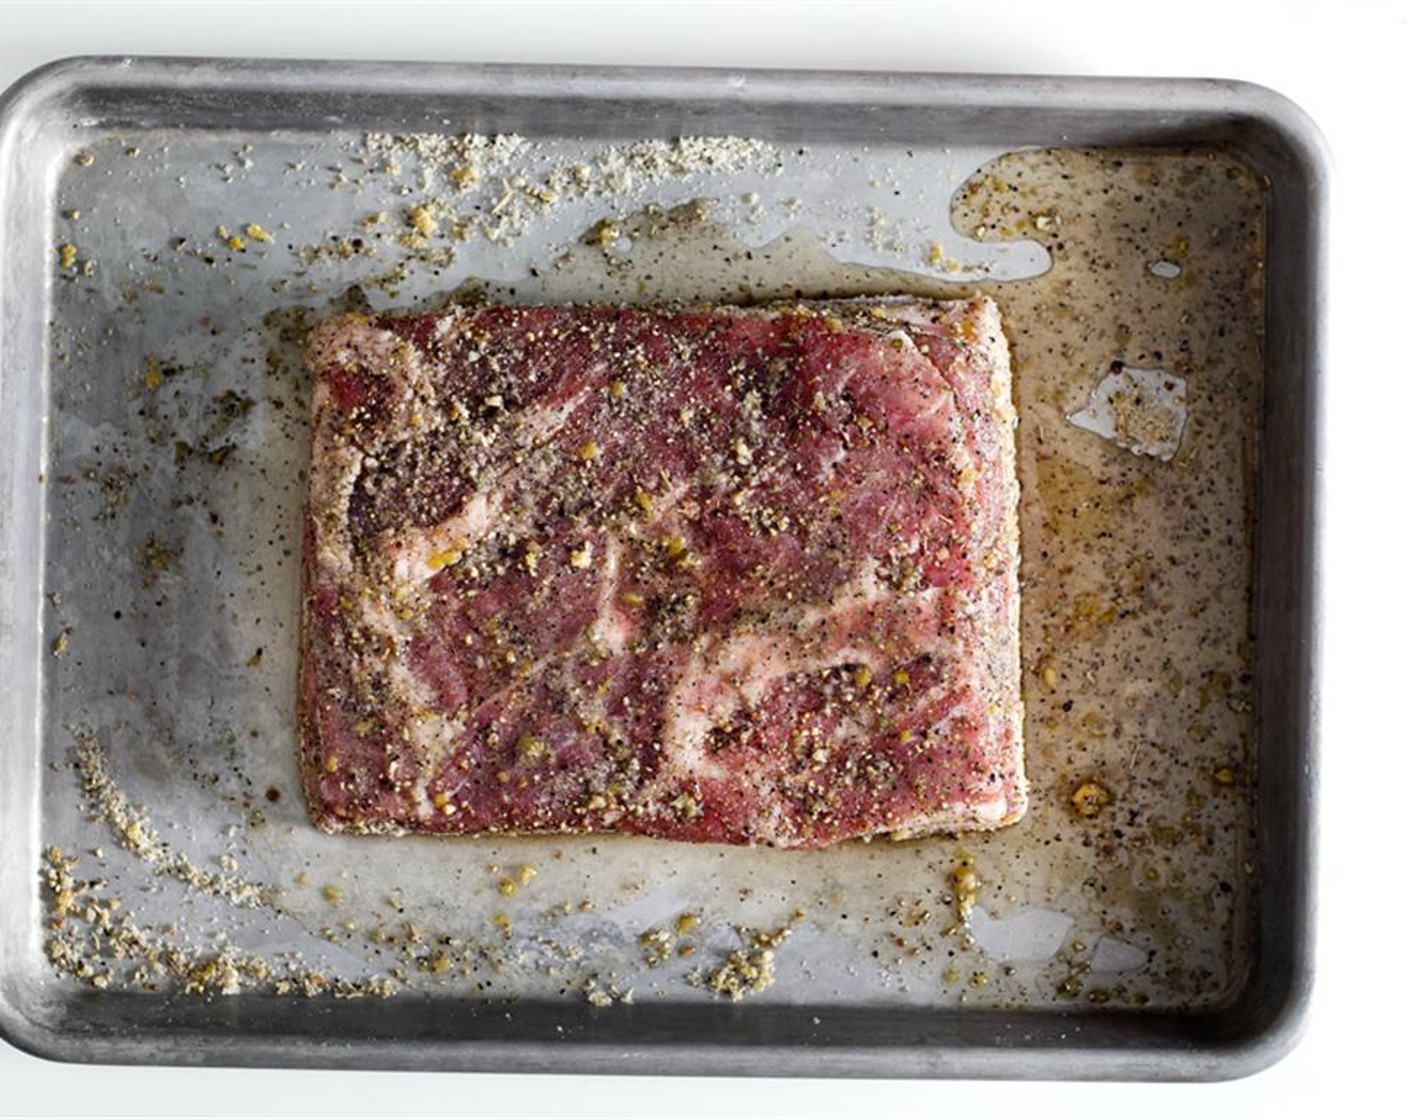 step 3 Place the slab of Skin-On Pork Belly (1 piece) in a baking-sheet. Pork belly should be roughly 8 × 8-inches (can be a square or rectangle). Rub the salt-mixture evenly on all sides of the pork belly.